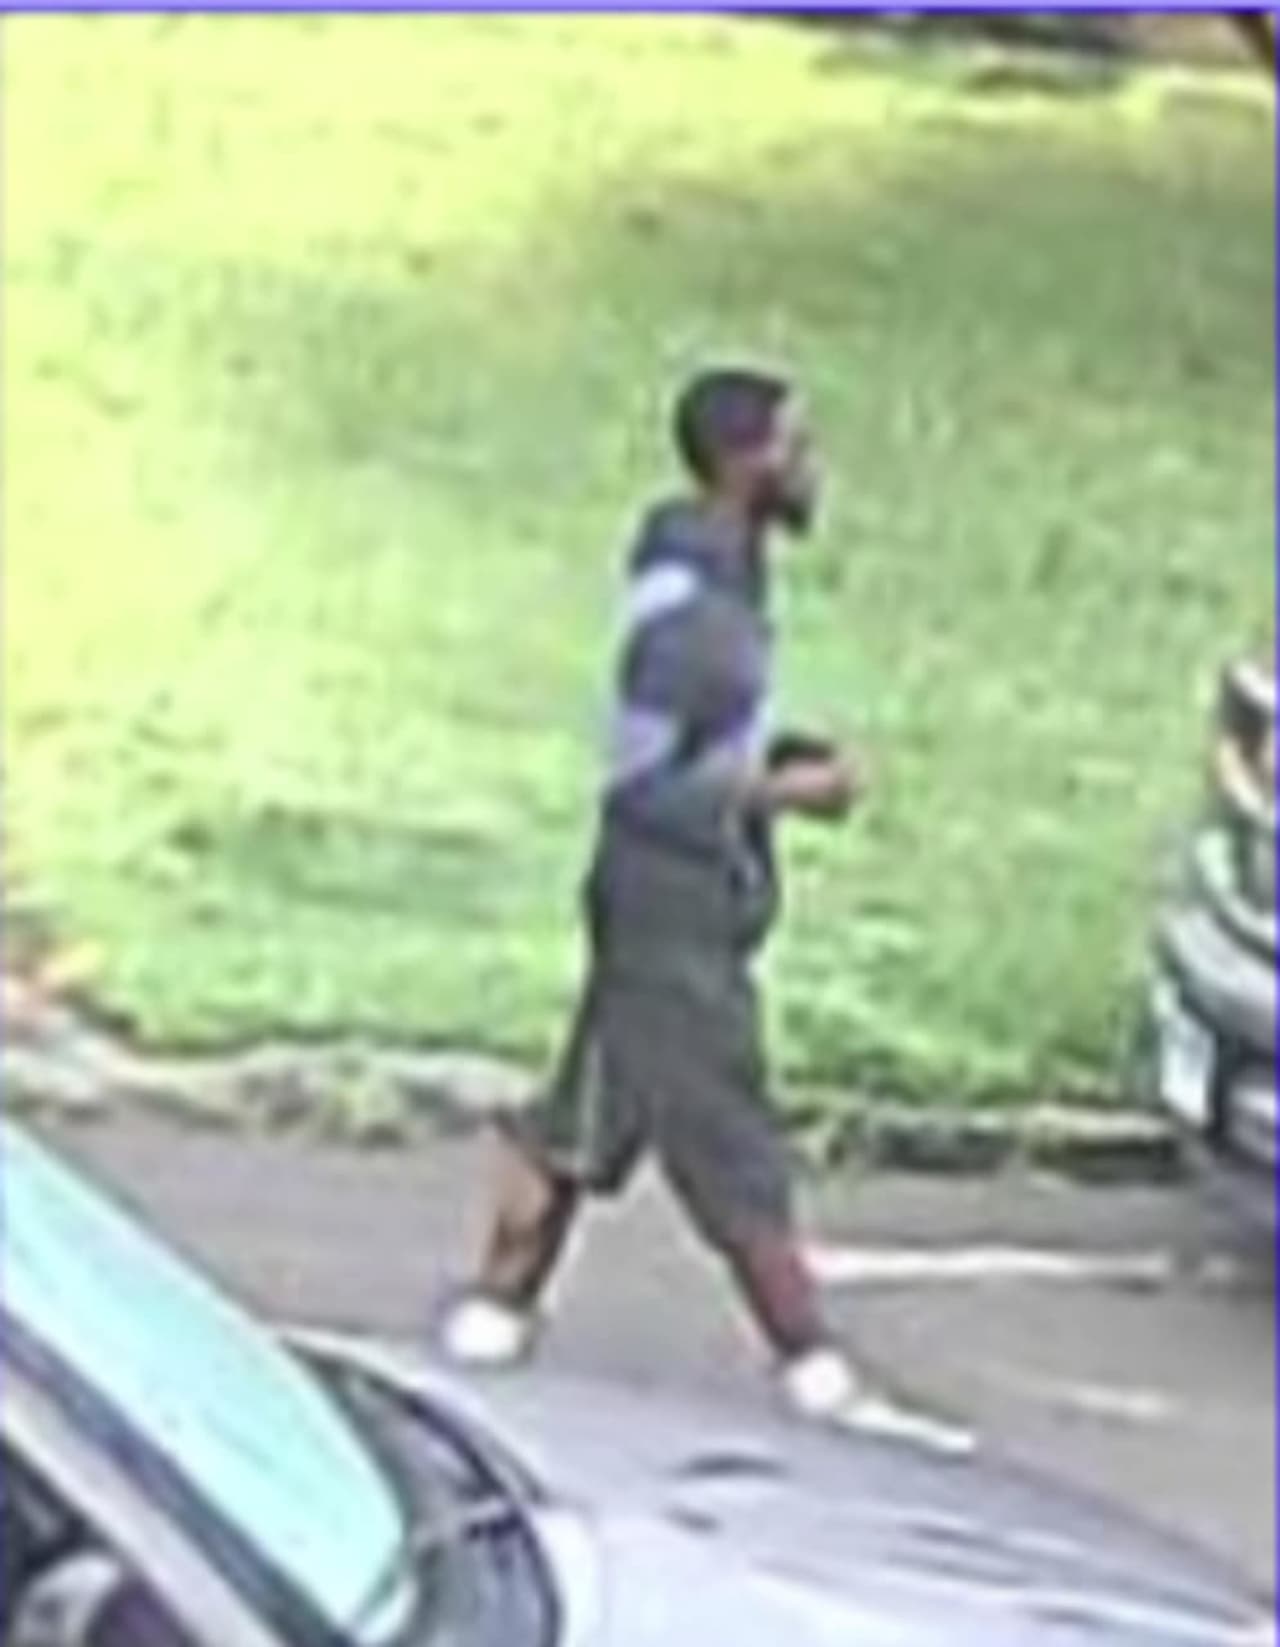 Know him? Police are searching for this man in connection with a home burglary.